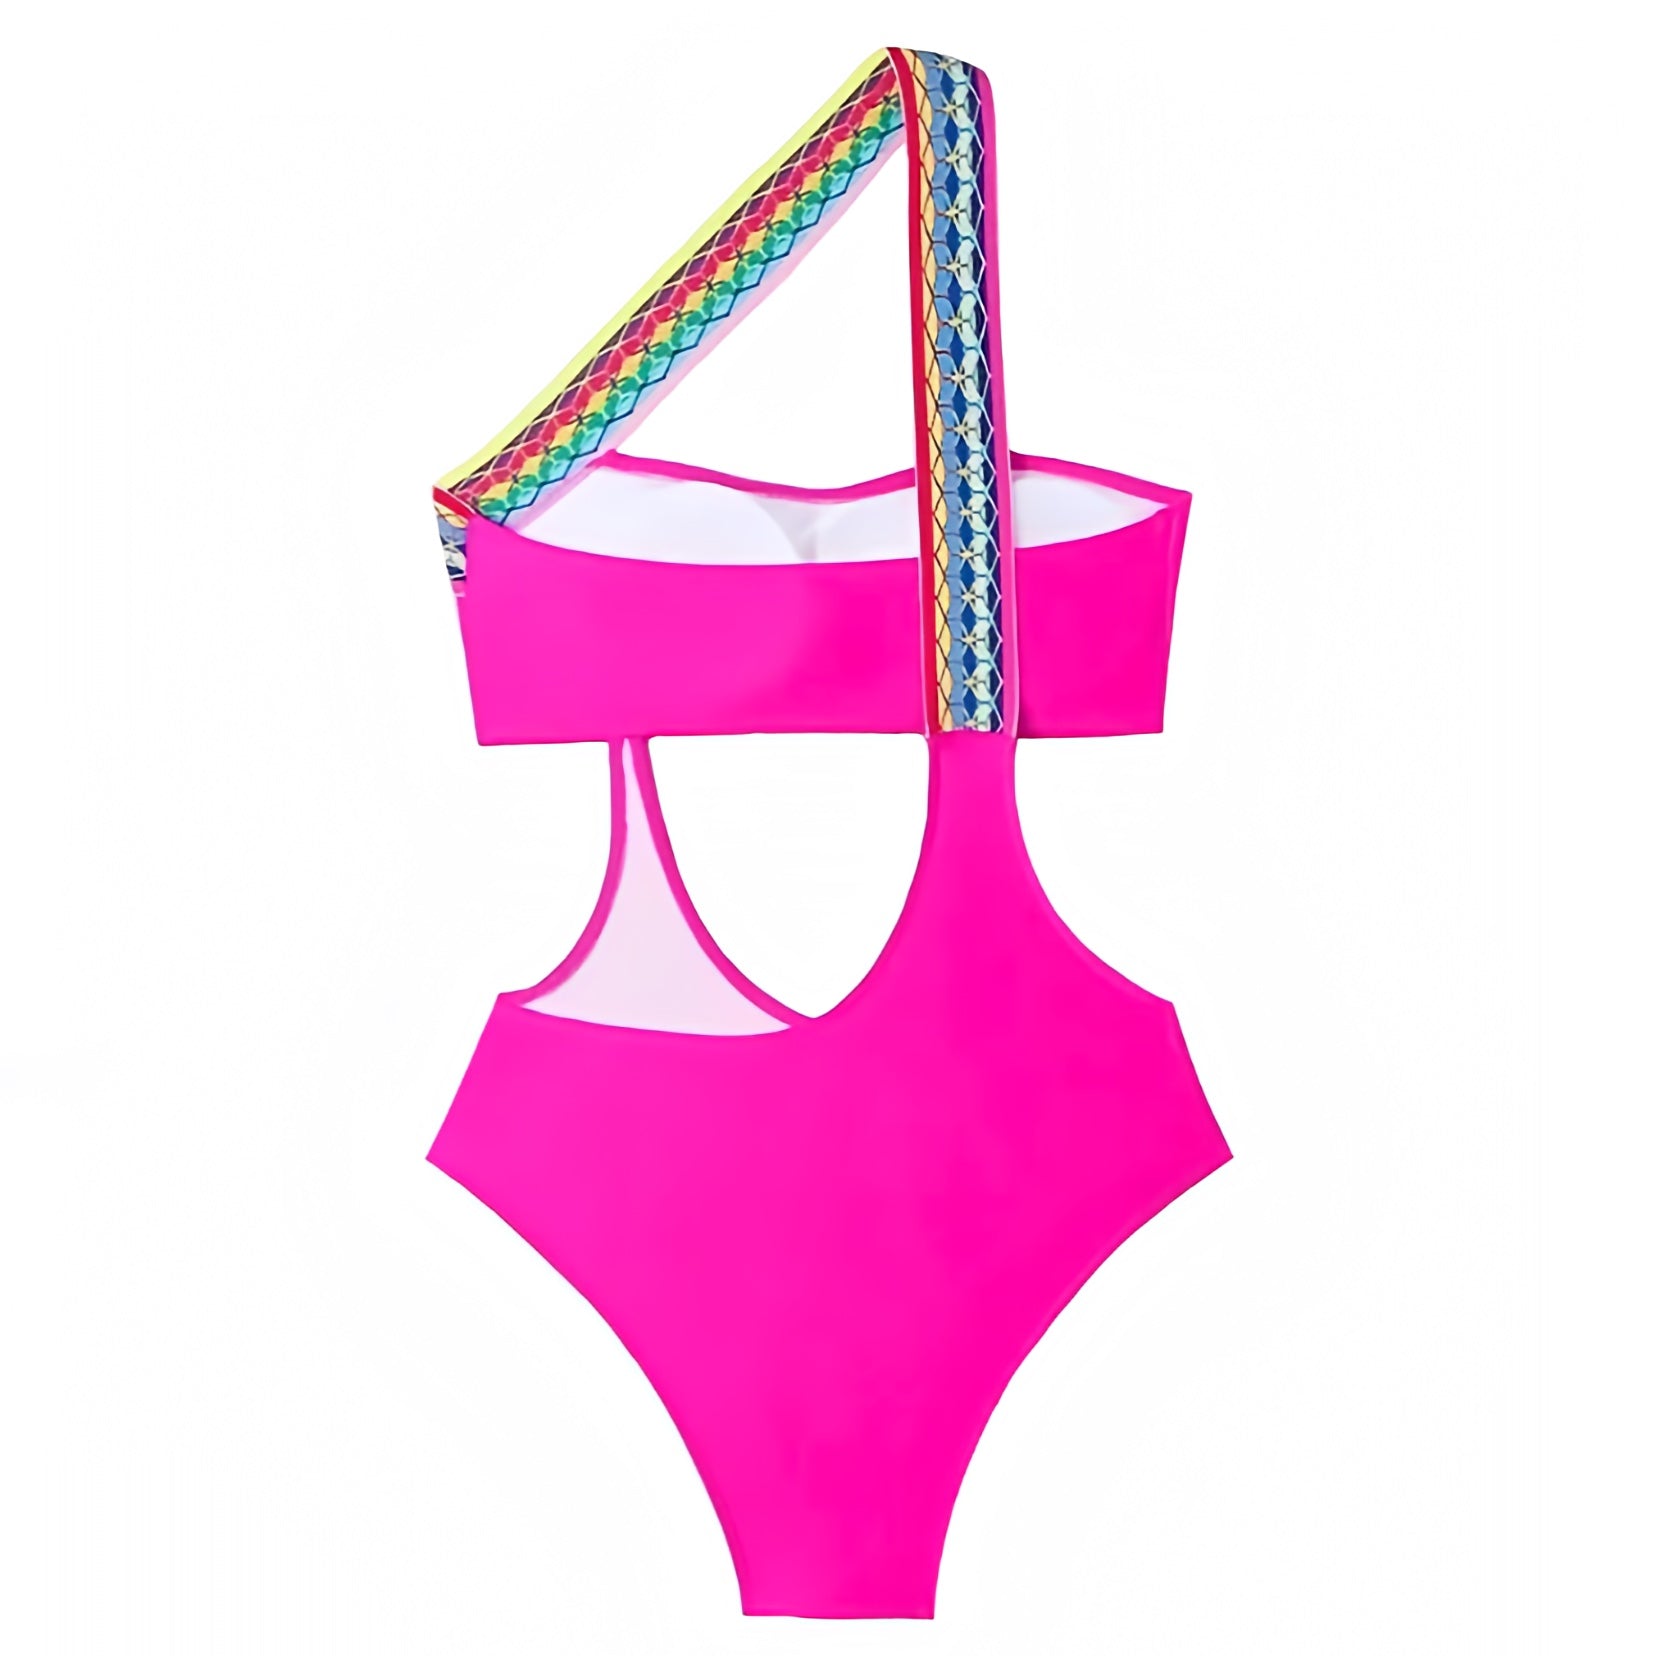 hot-bright-pink-rainbow-multi-color-striped-patterned-slim-fit-bodycon-cut-out-bandeau-cross-strap-off-shoulder-asymmetric-wireless-push-up-cheeky-thong-one-piece-swimsuit-bathing-suit-swimwear-women-ladies-girls-tweens-teens-chic-trendy-spring-2024-summer-preppy-style-feminine-cute-girlie-tropical-vacation-beach-wear-altard-state-pacsun-revolve-roller-rabbit-aviator-nation-dupe